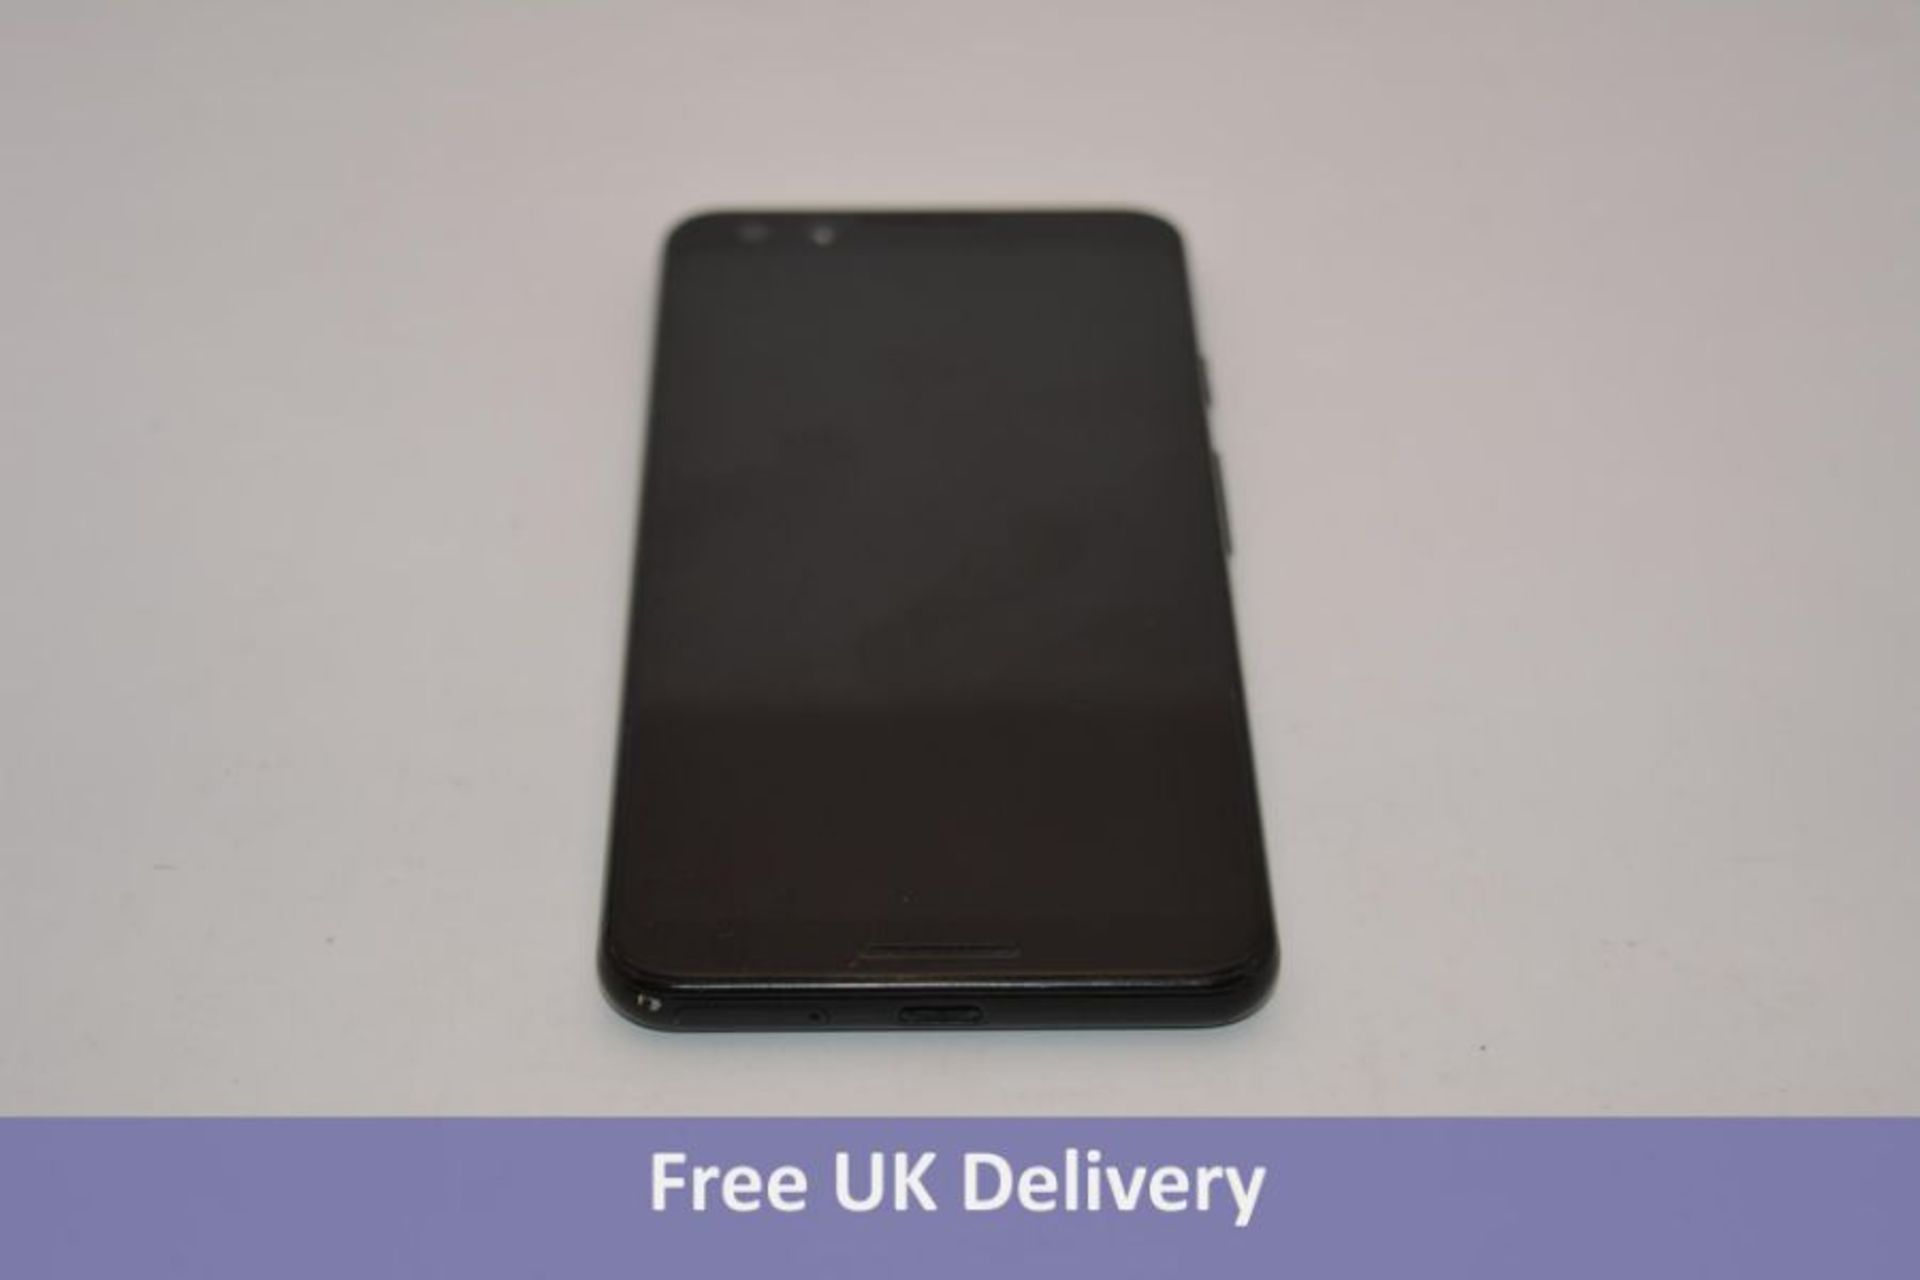 Google Pixel 3 Android Mobile Phone, 64GB. Used, no box or accessories. Checkmend clear, ref. CM1868